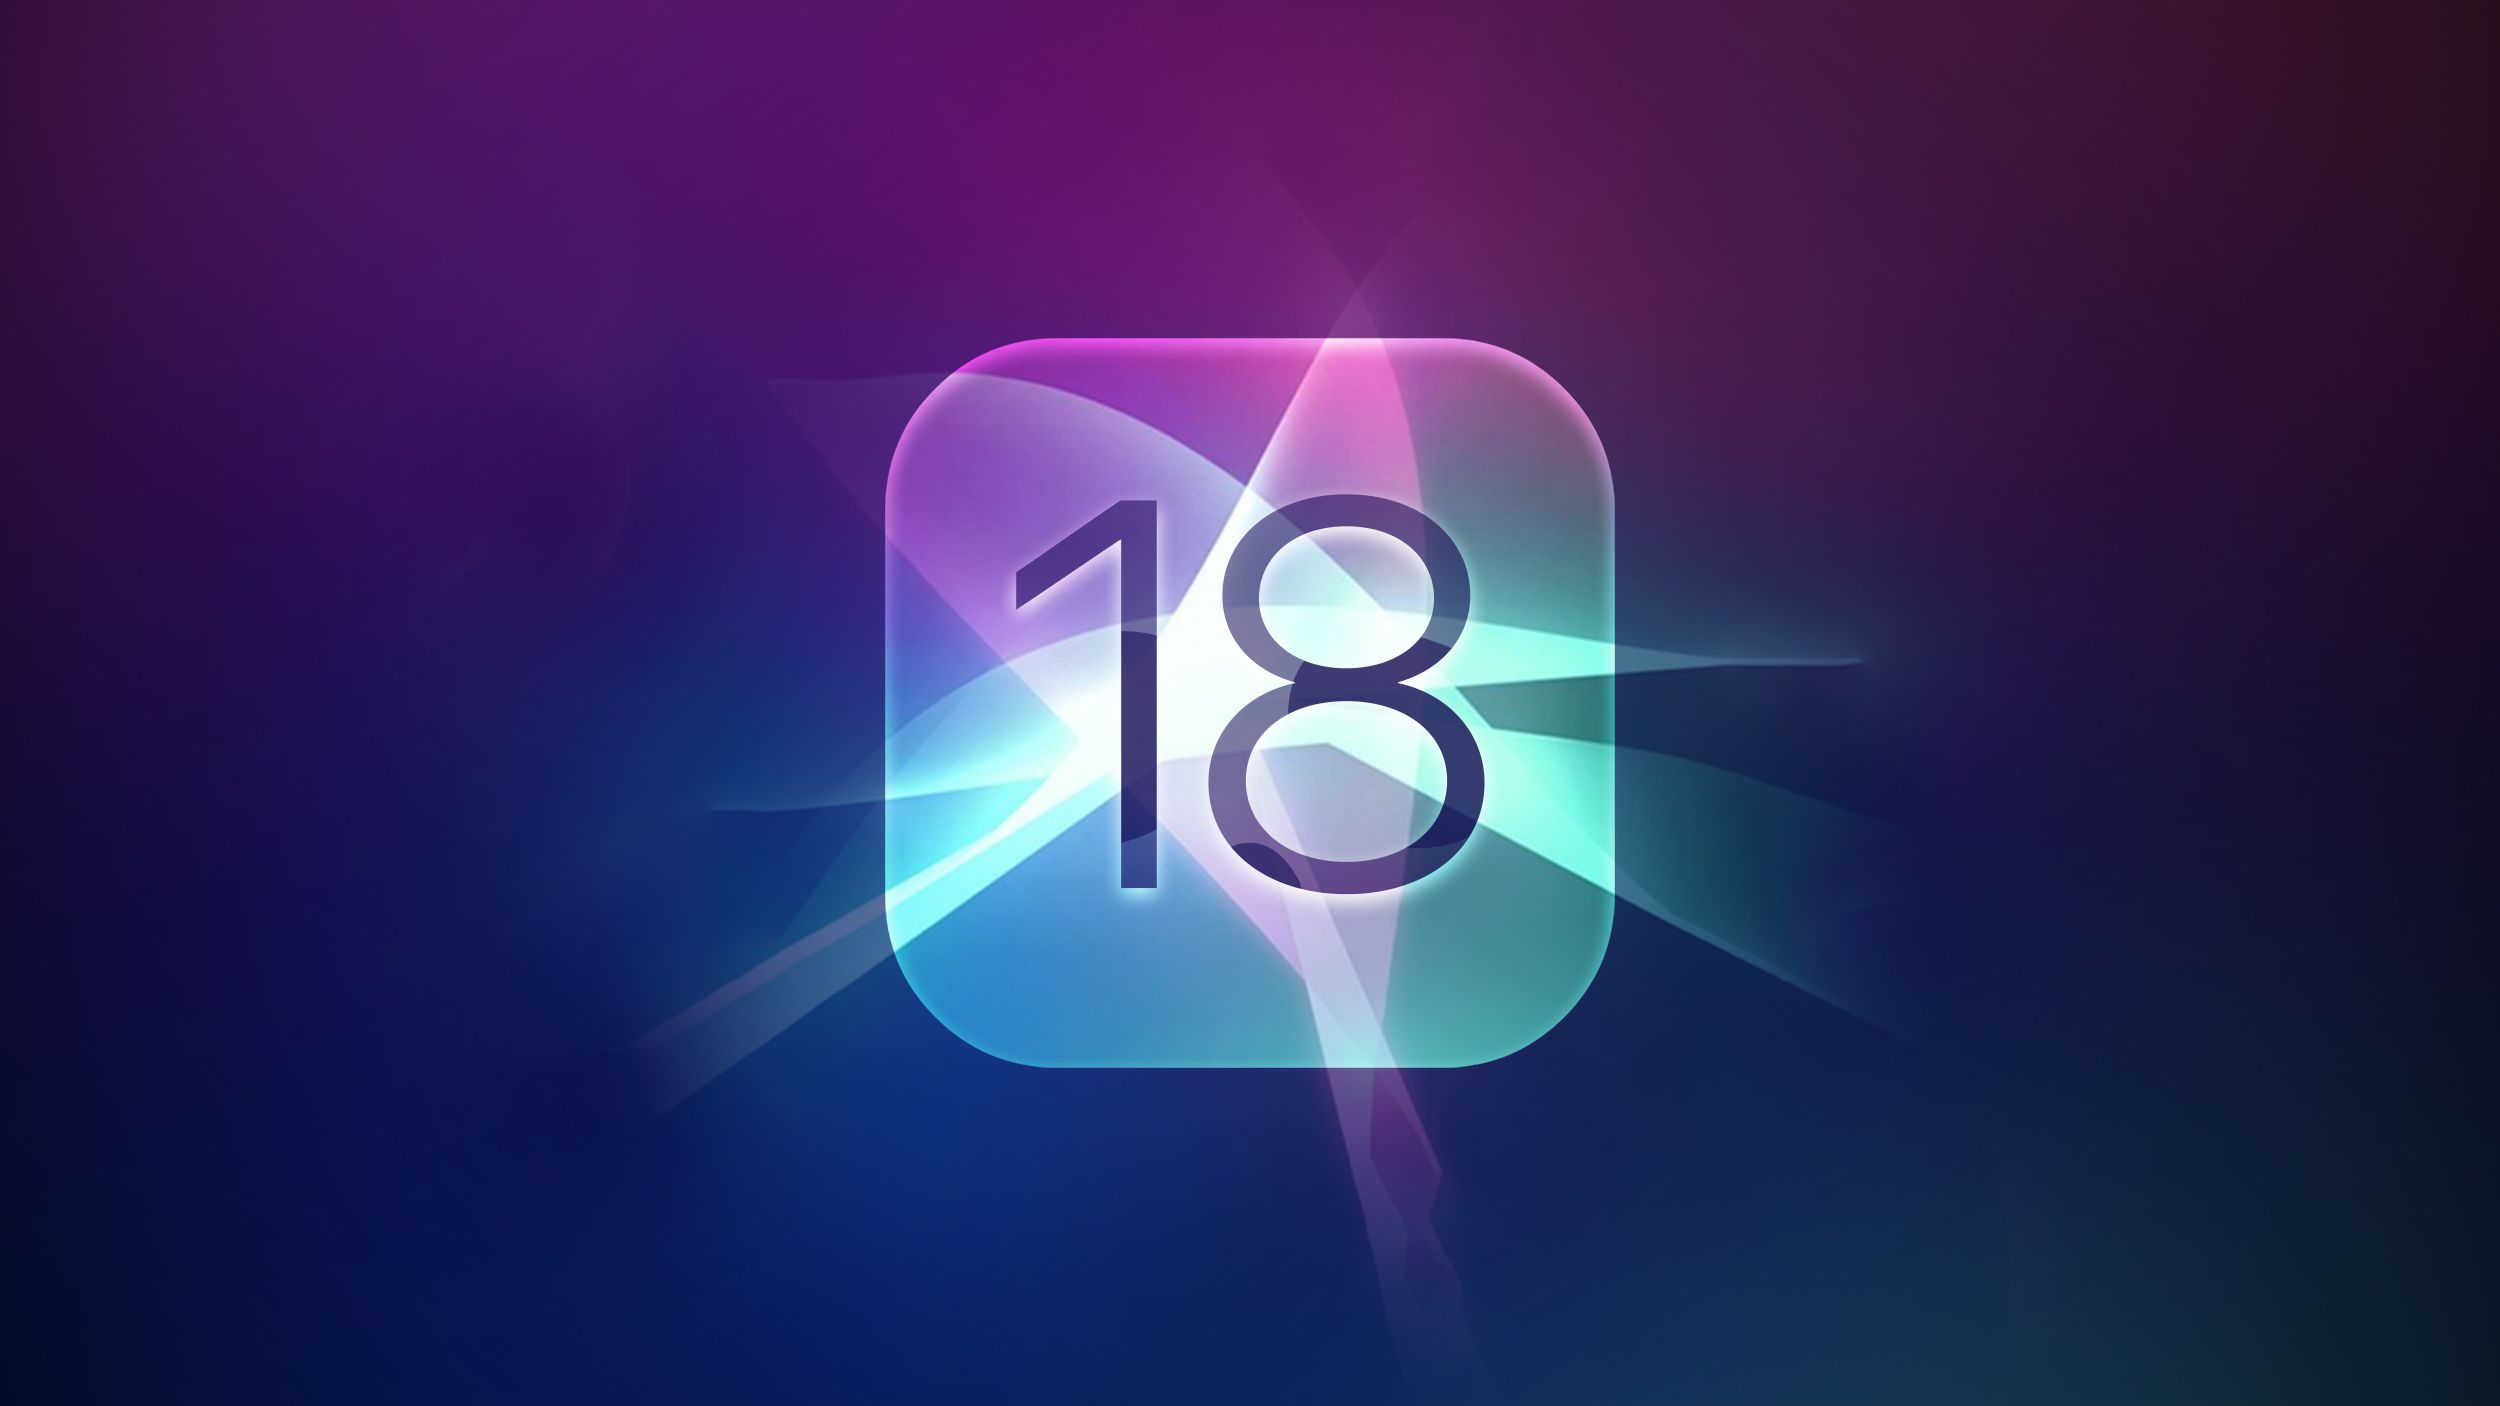 iOS 18 Rumored to Add These 10 New Features to Your iPhone